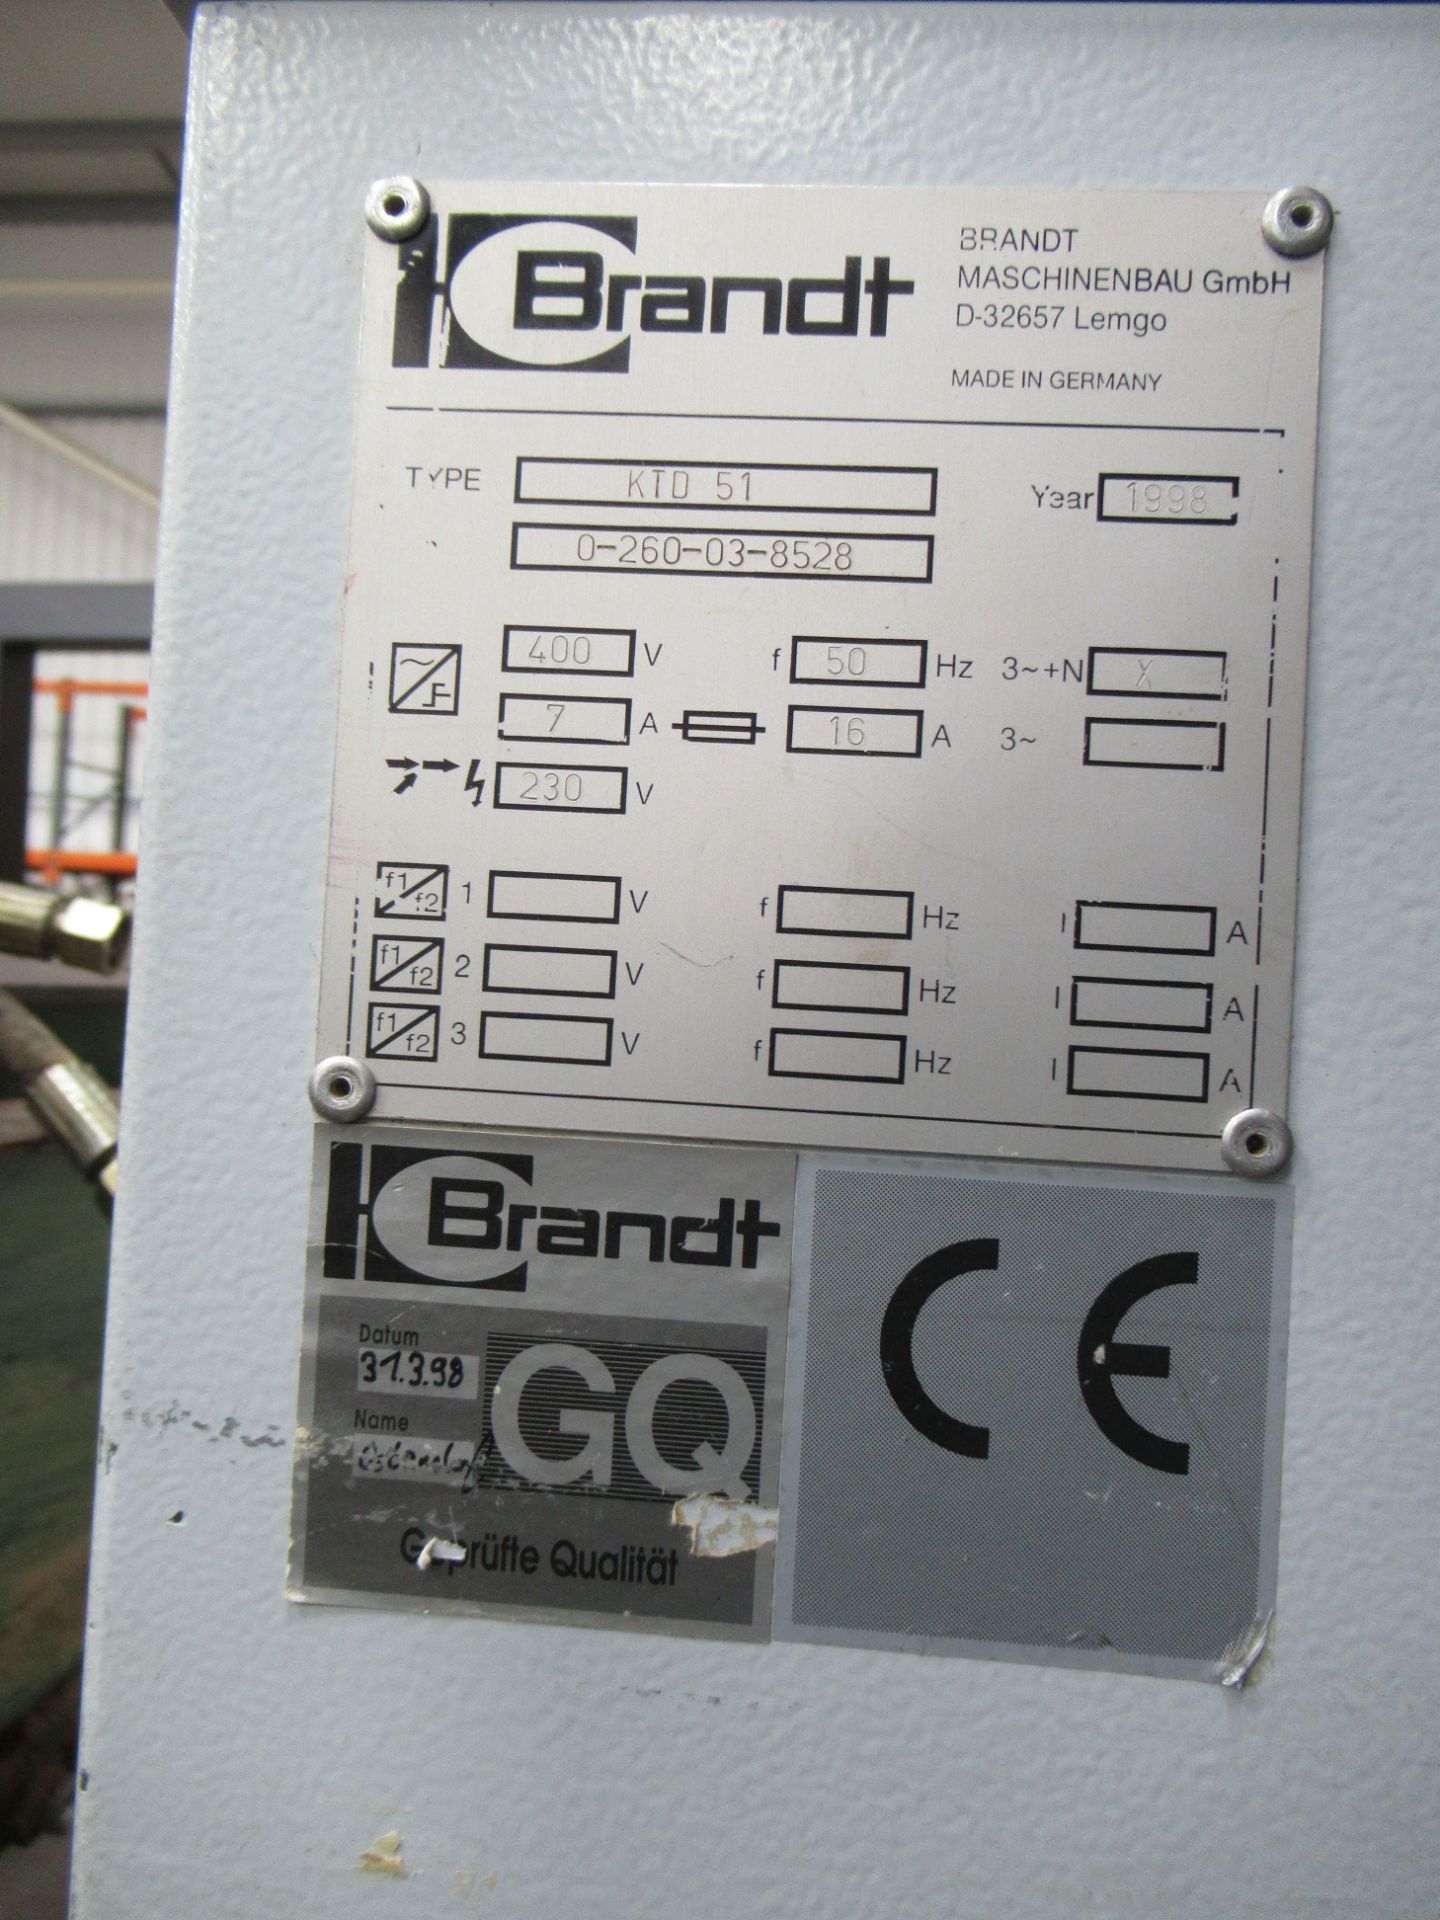 Brandt F10/100 Top and Bottom Contour Edgebander and Brandt KTD 51 Contour Edgebander - both 3ph. - Image 12 of 12